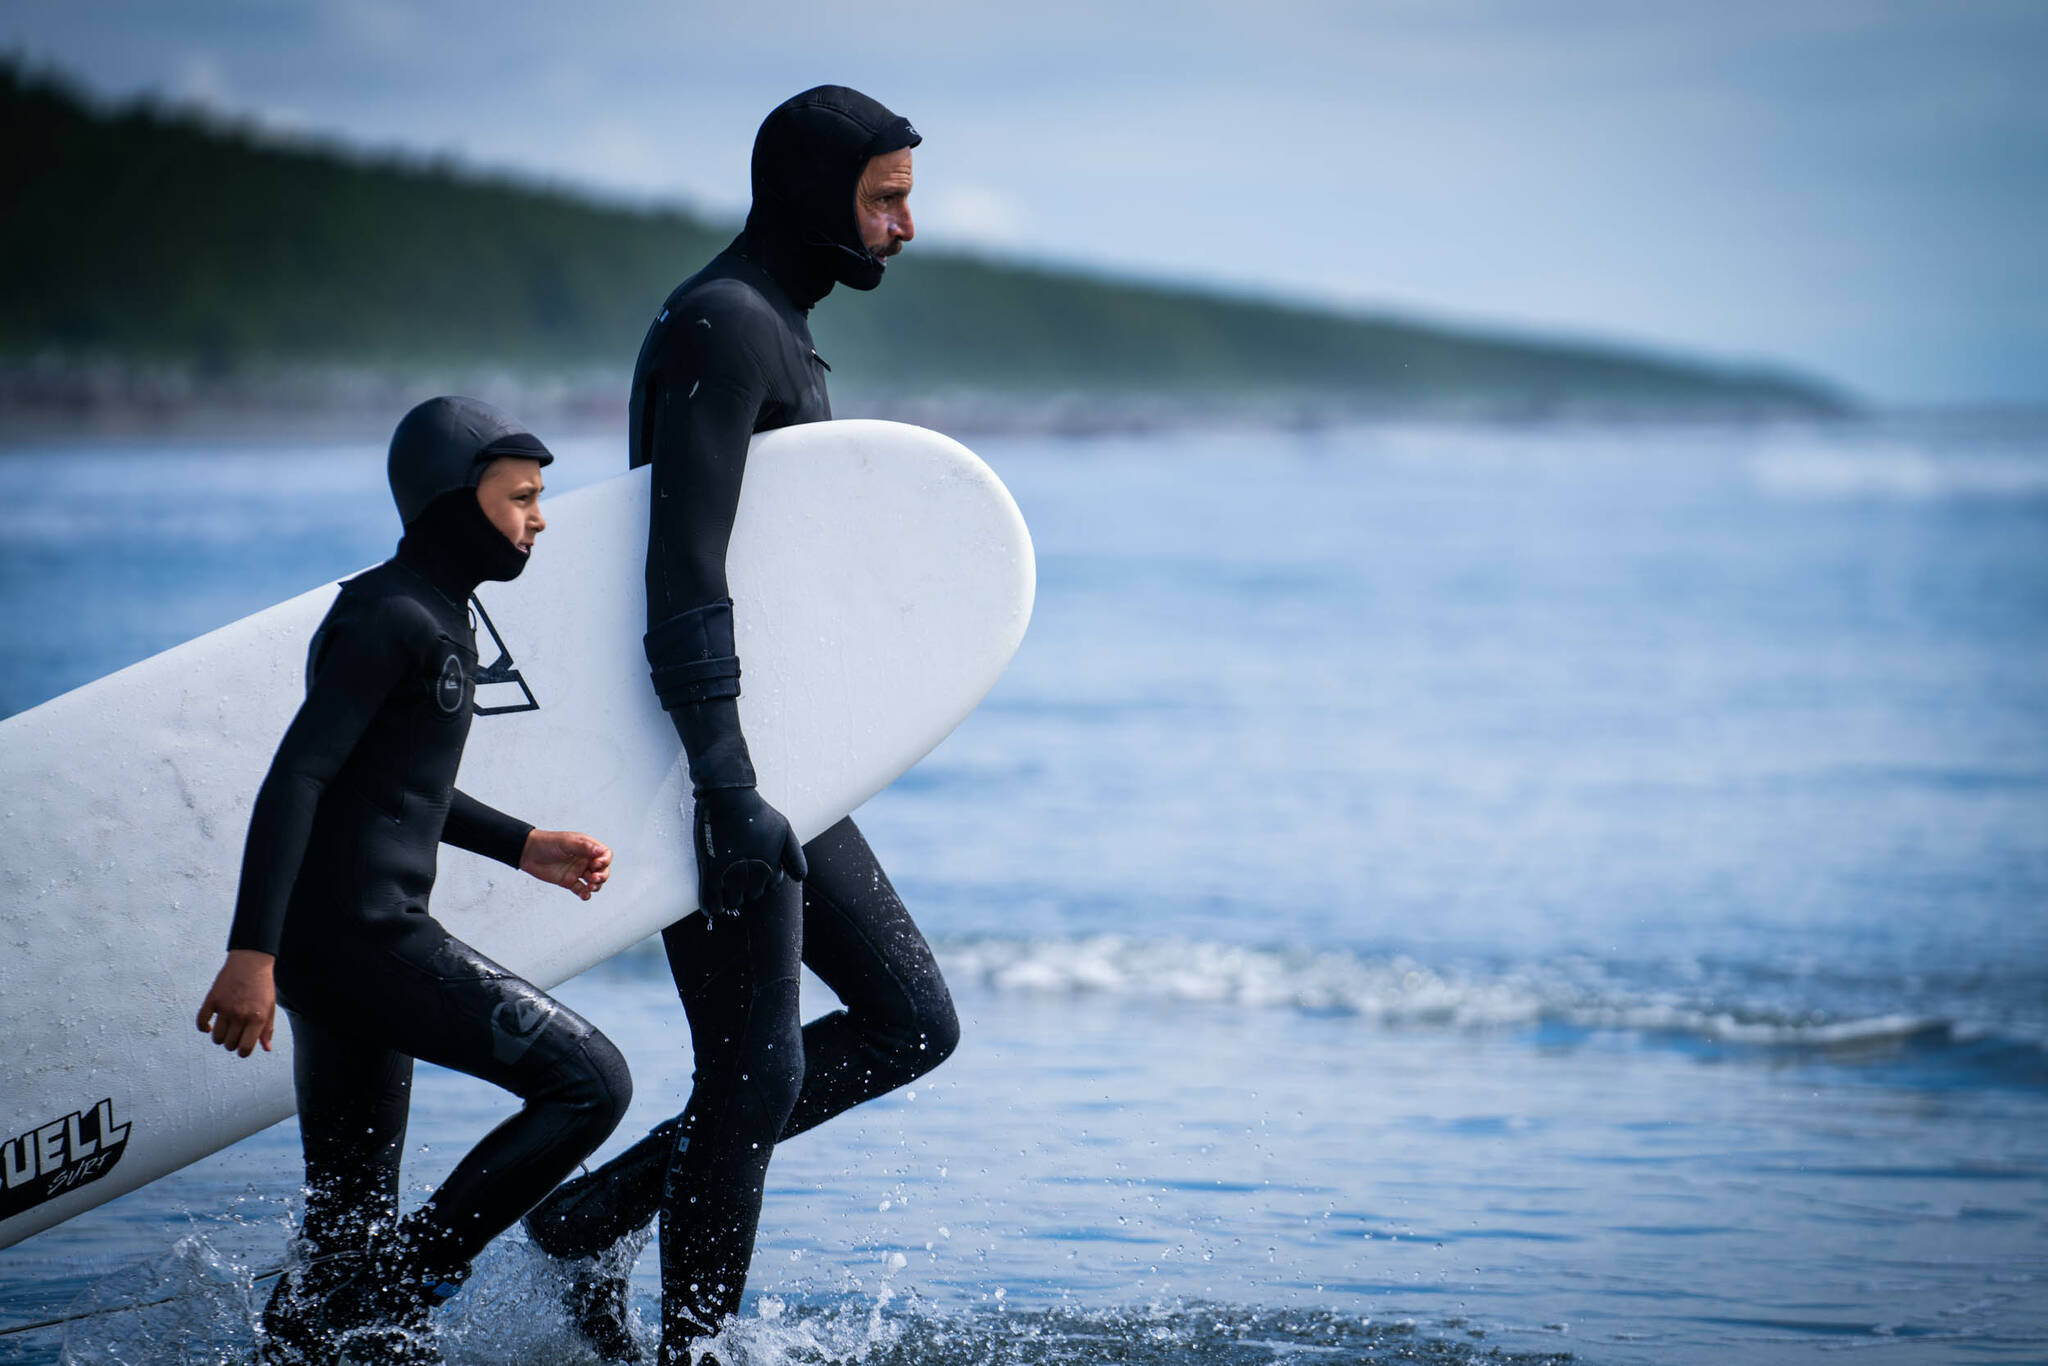 Yakutat Surf Club gives youth the opportunity to challenge themselves physically and mentally in Yakutat’s cold crashing waters. (Courtesy Photo / Bethany Goodrich)